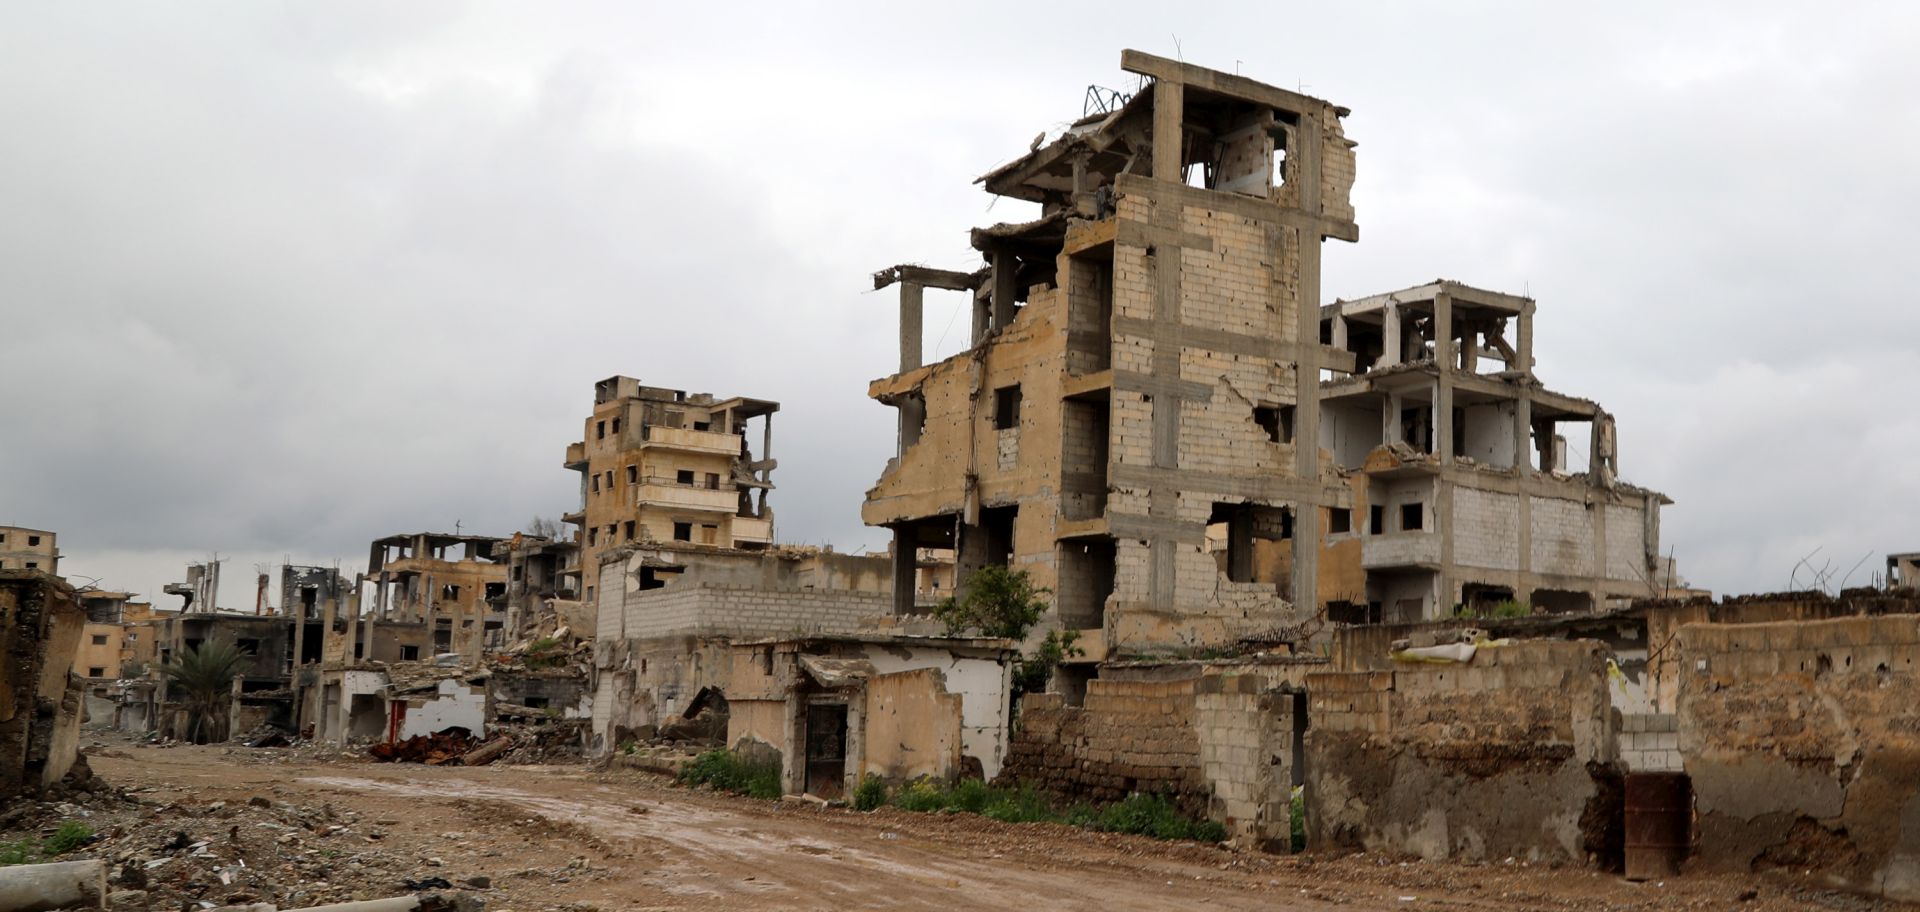 epa07491530 A general view shows destroyed buildings in Raqqa city, northeastern Syria, 31 March 2019 (issued 08 April 2019). The US-backed Syrian Democratic Forces (SDF) announced on 18 October 2017 that they have seized the majority of the northeastern Syrian city of al-Raqqa concluding a campaign that began on 06 June to liberate the city, former capital of the self-proclaimed caliphate by the so-called Islamic State (IS or ISIS) terror organization in 2014.  EPA/AHMED MARDNLI